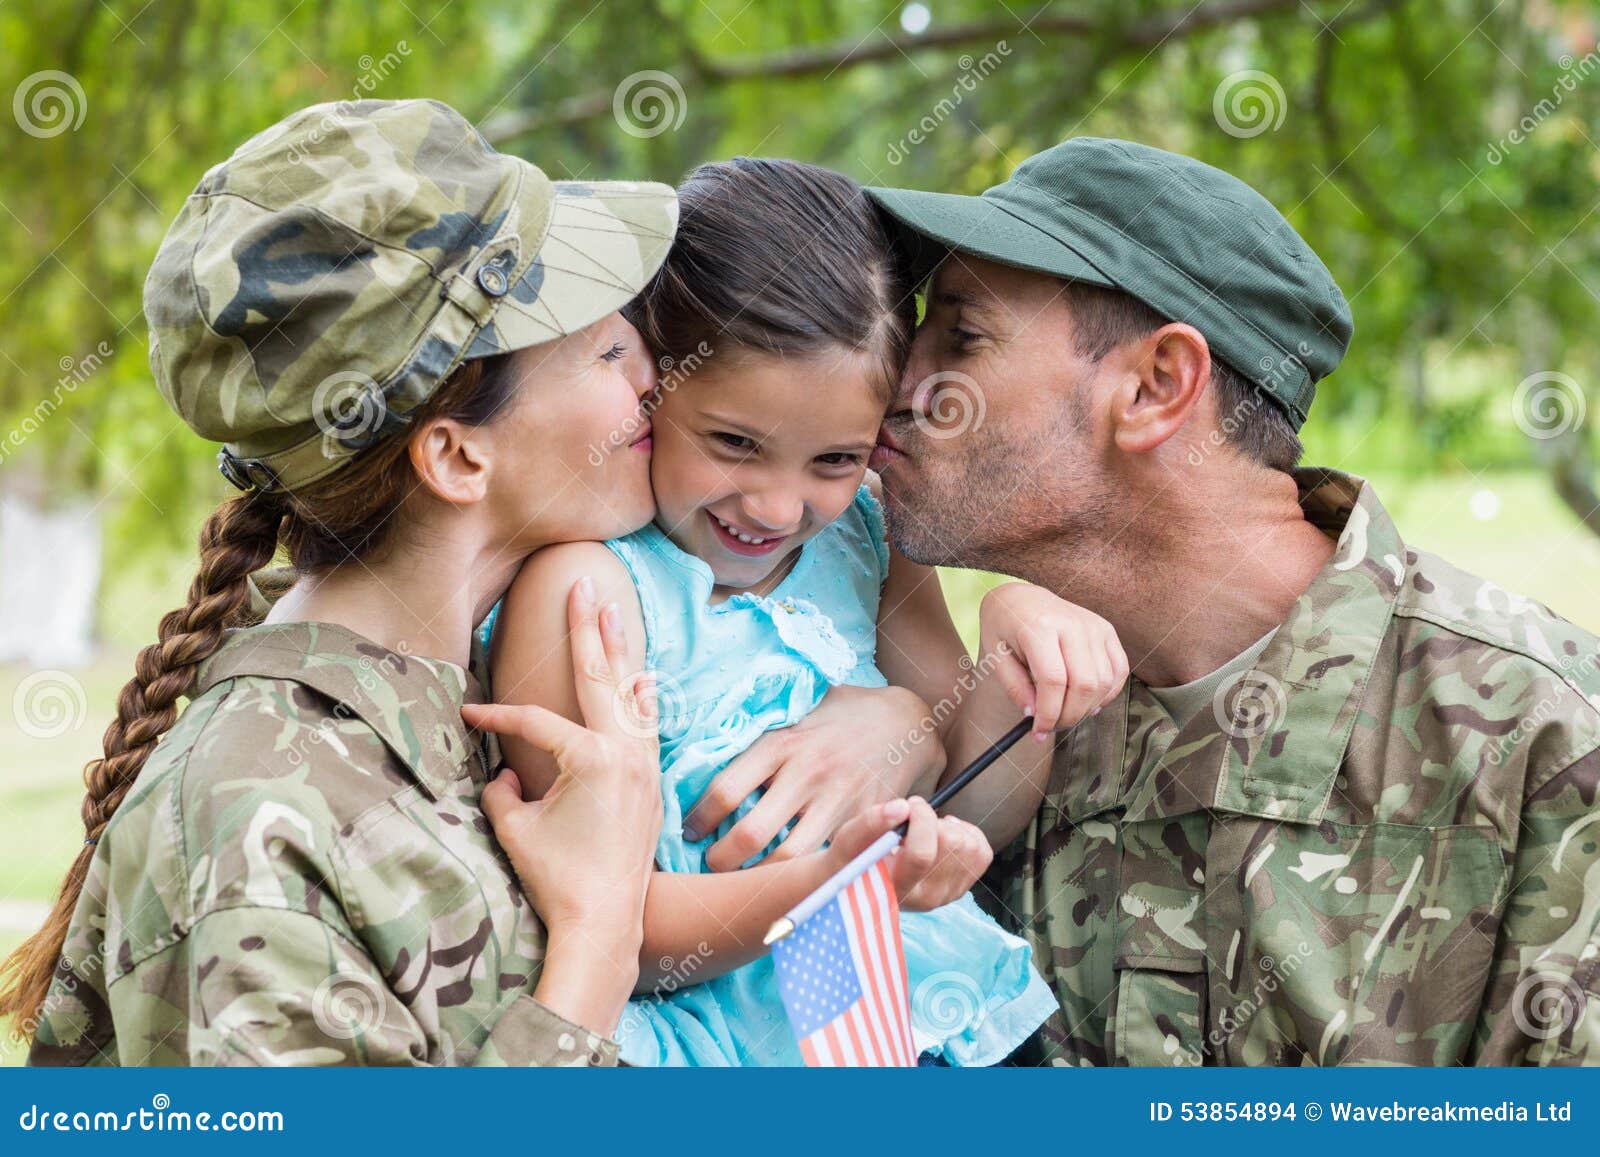 Army Parents Reunited with Their Daughter Stock Photo - Image of ...